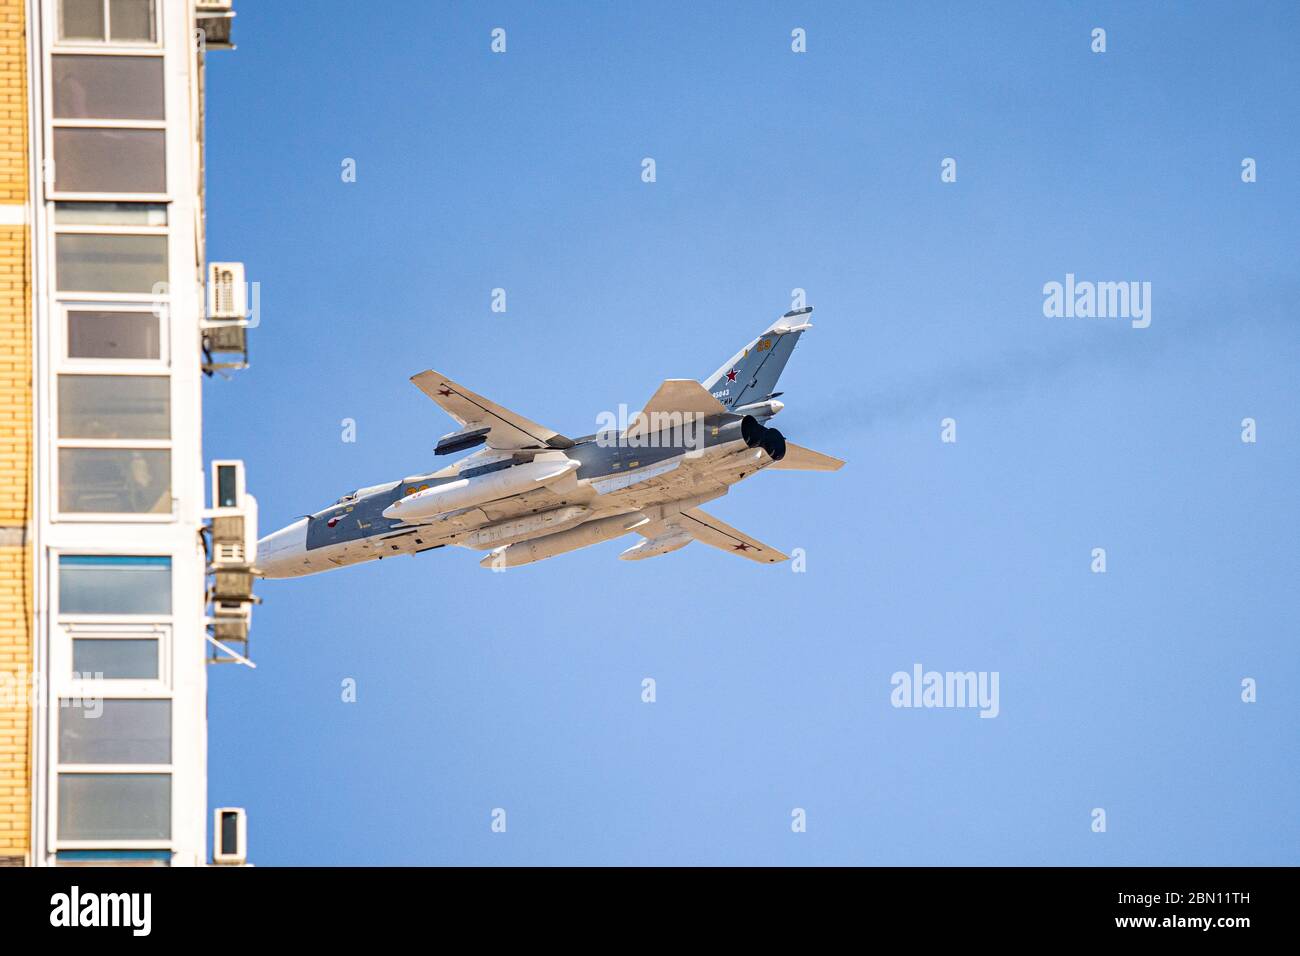 Russia Khabarovsk May 9 Su 24m2 Upgraded Front Line Bomber With Variable Geometry Wing Parade In Honor Of Victory Military Air Parade In Stock Photo Alamy